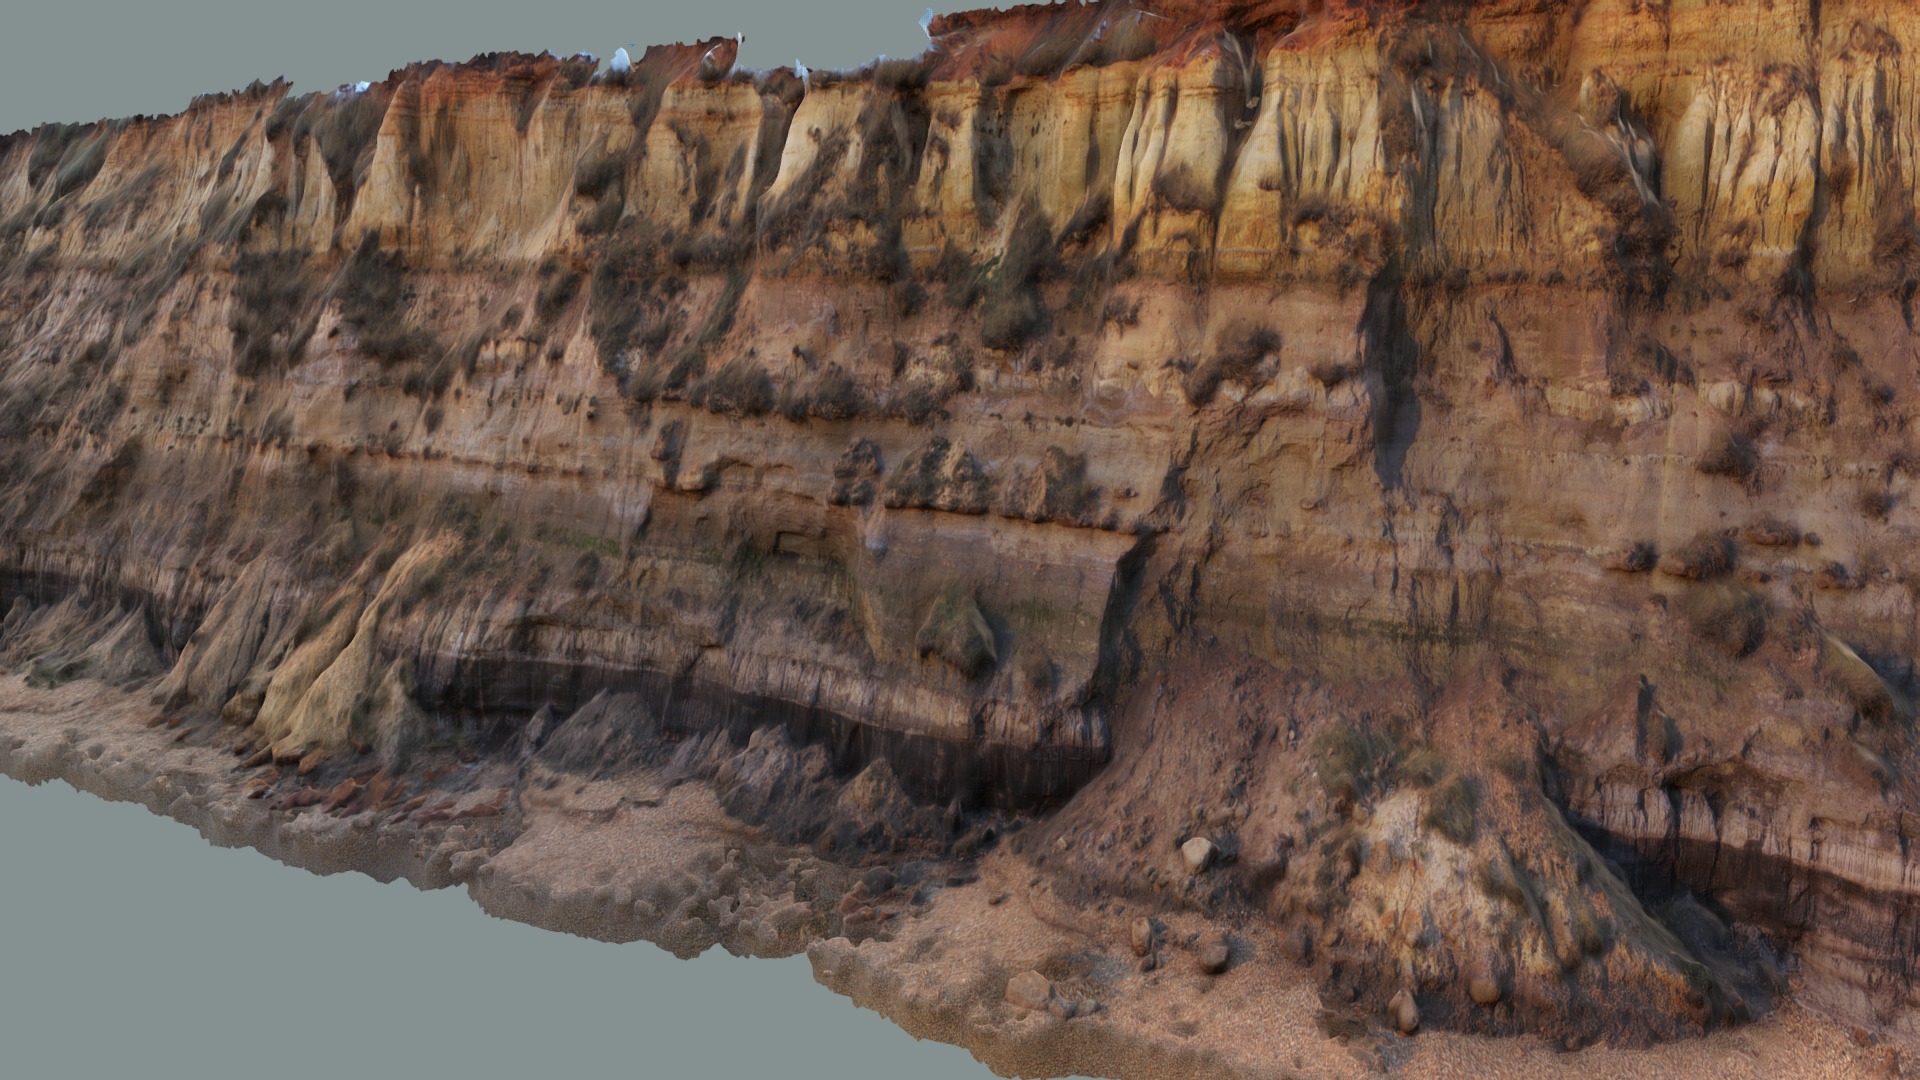 3D model Cliff Photoscan - This is a 3D model of the Cliff Photoscan. The 3D model is about a cliff side with a body of water below.